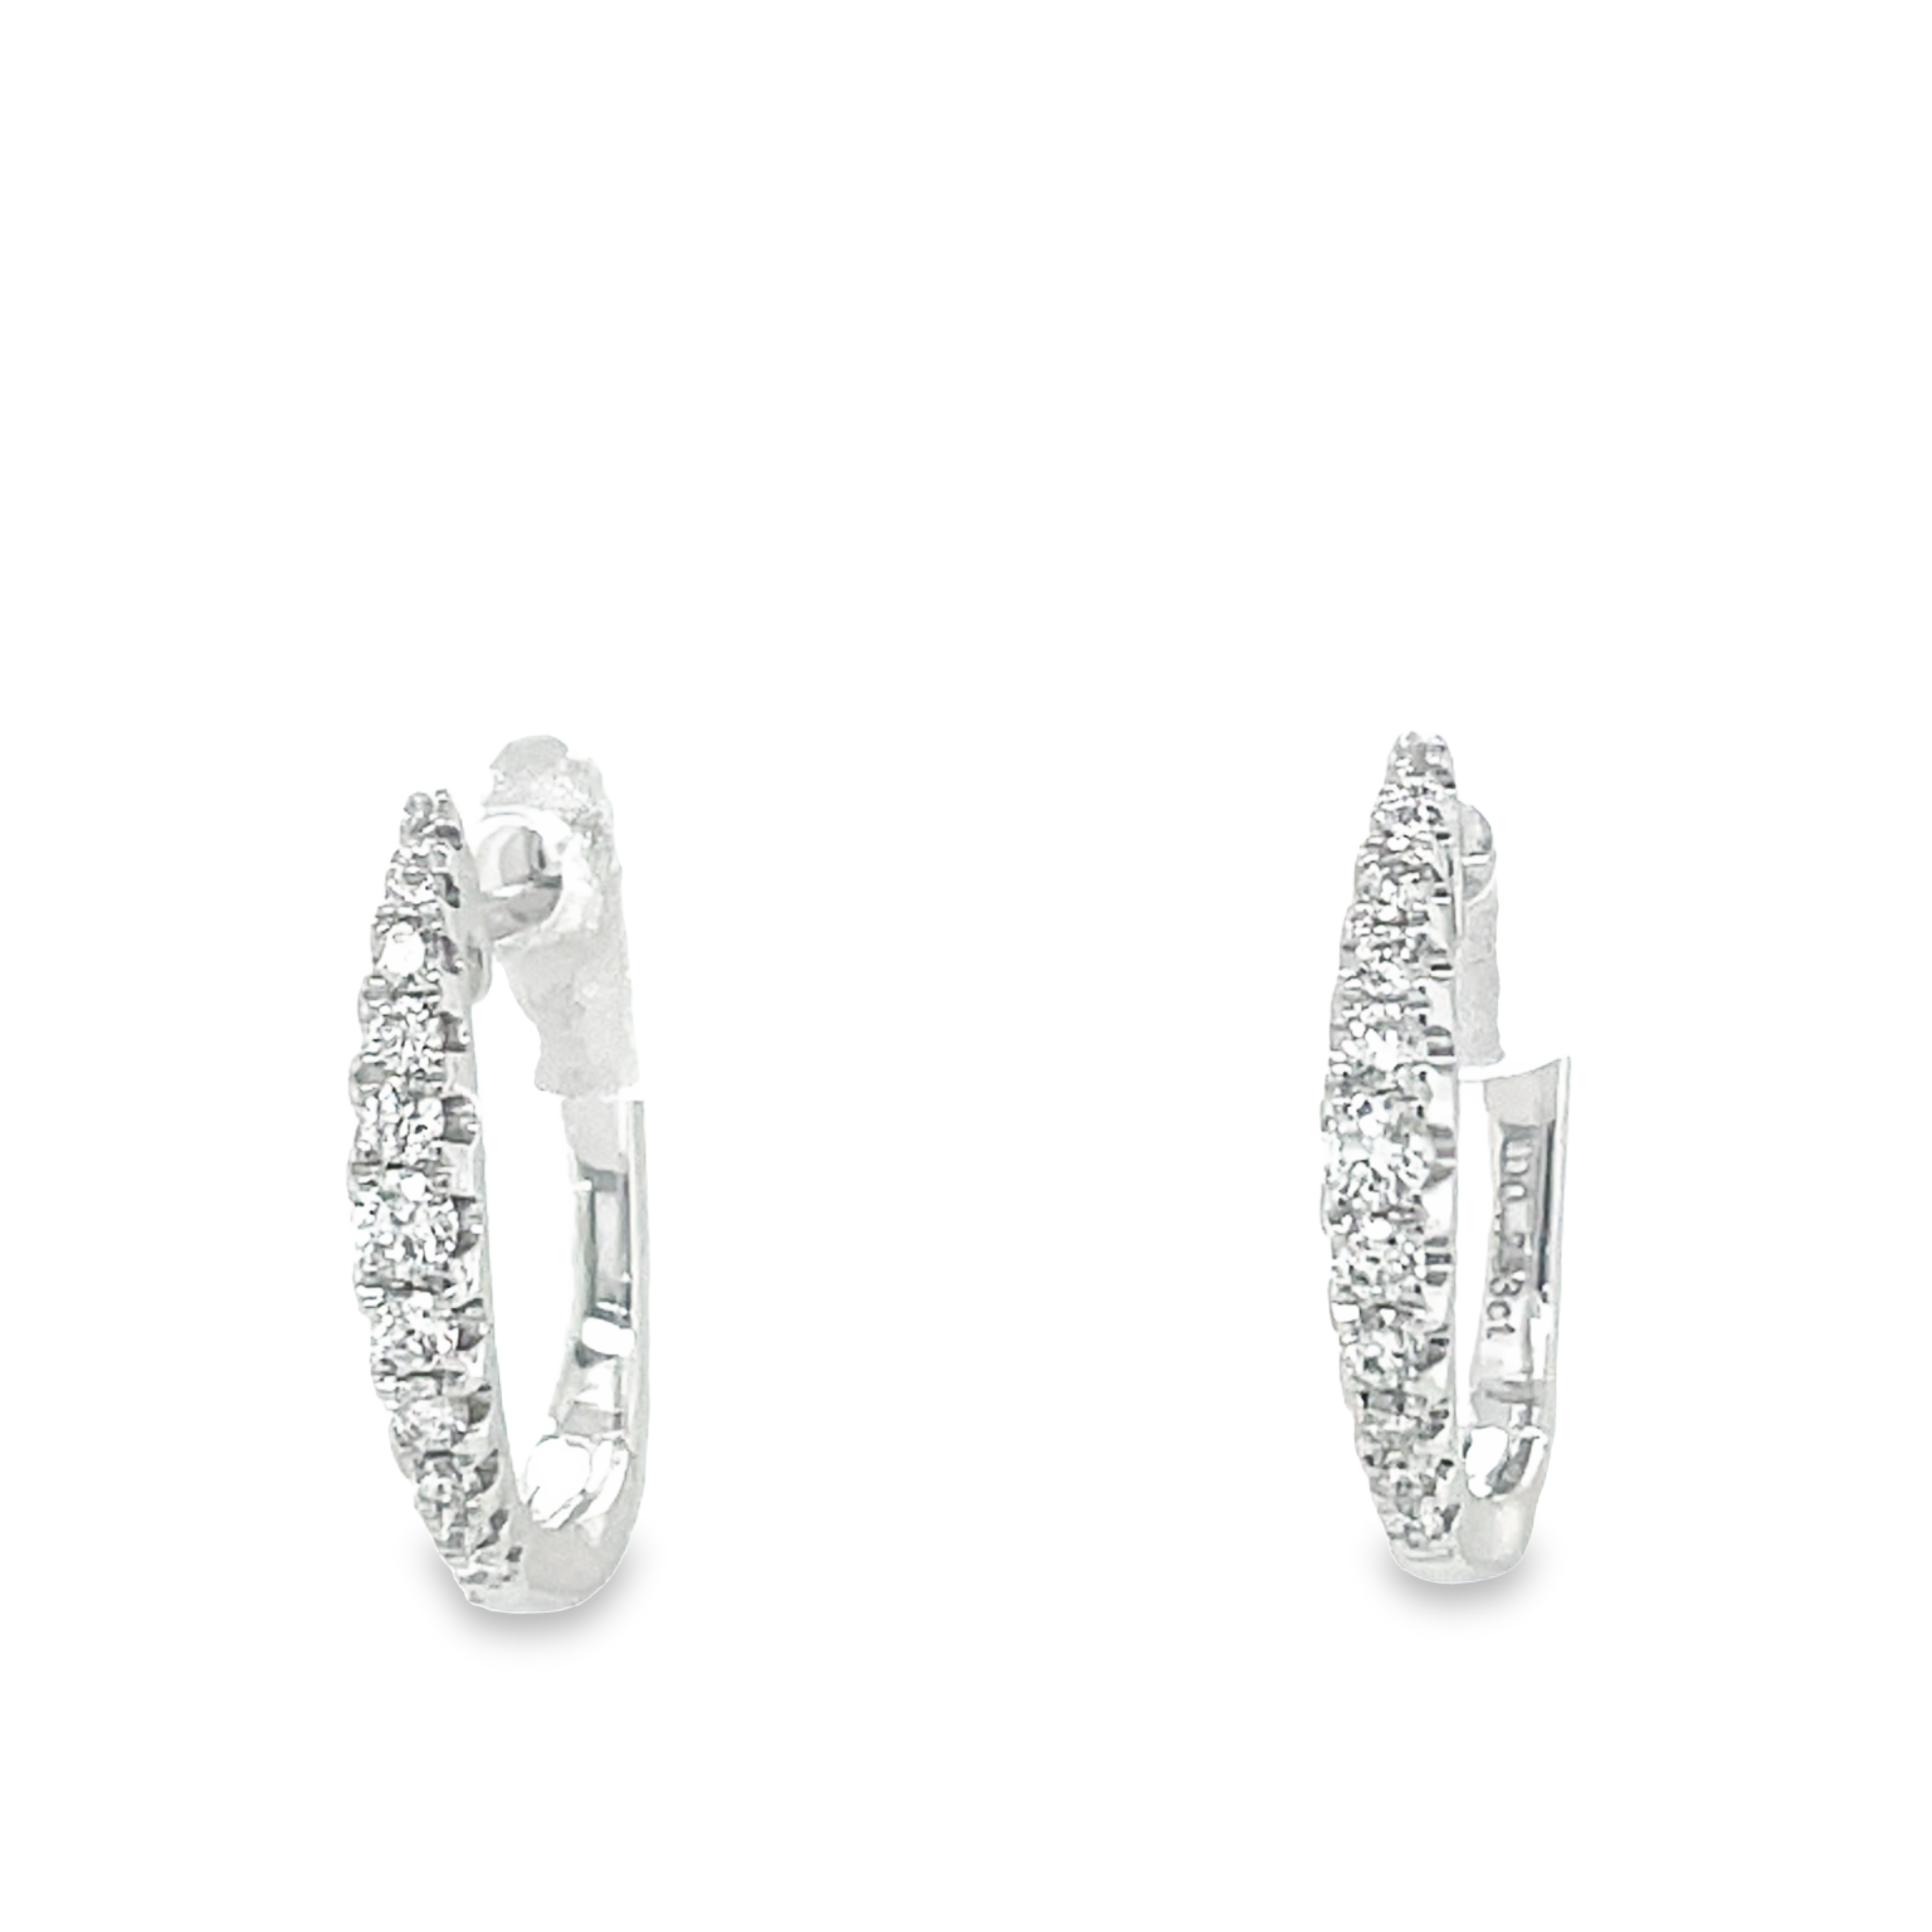 14k white gold encrusted with dazzling round diamonds for a total carat weight of 0.25 cts. These earrings are 15.00 mm long and feature a secured hinged system - making them effortless to wear!